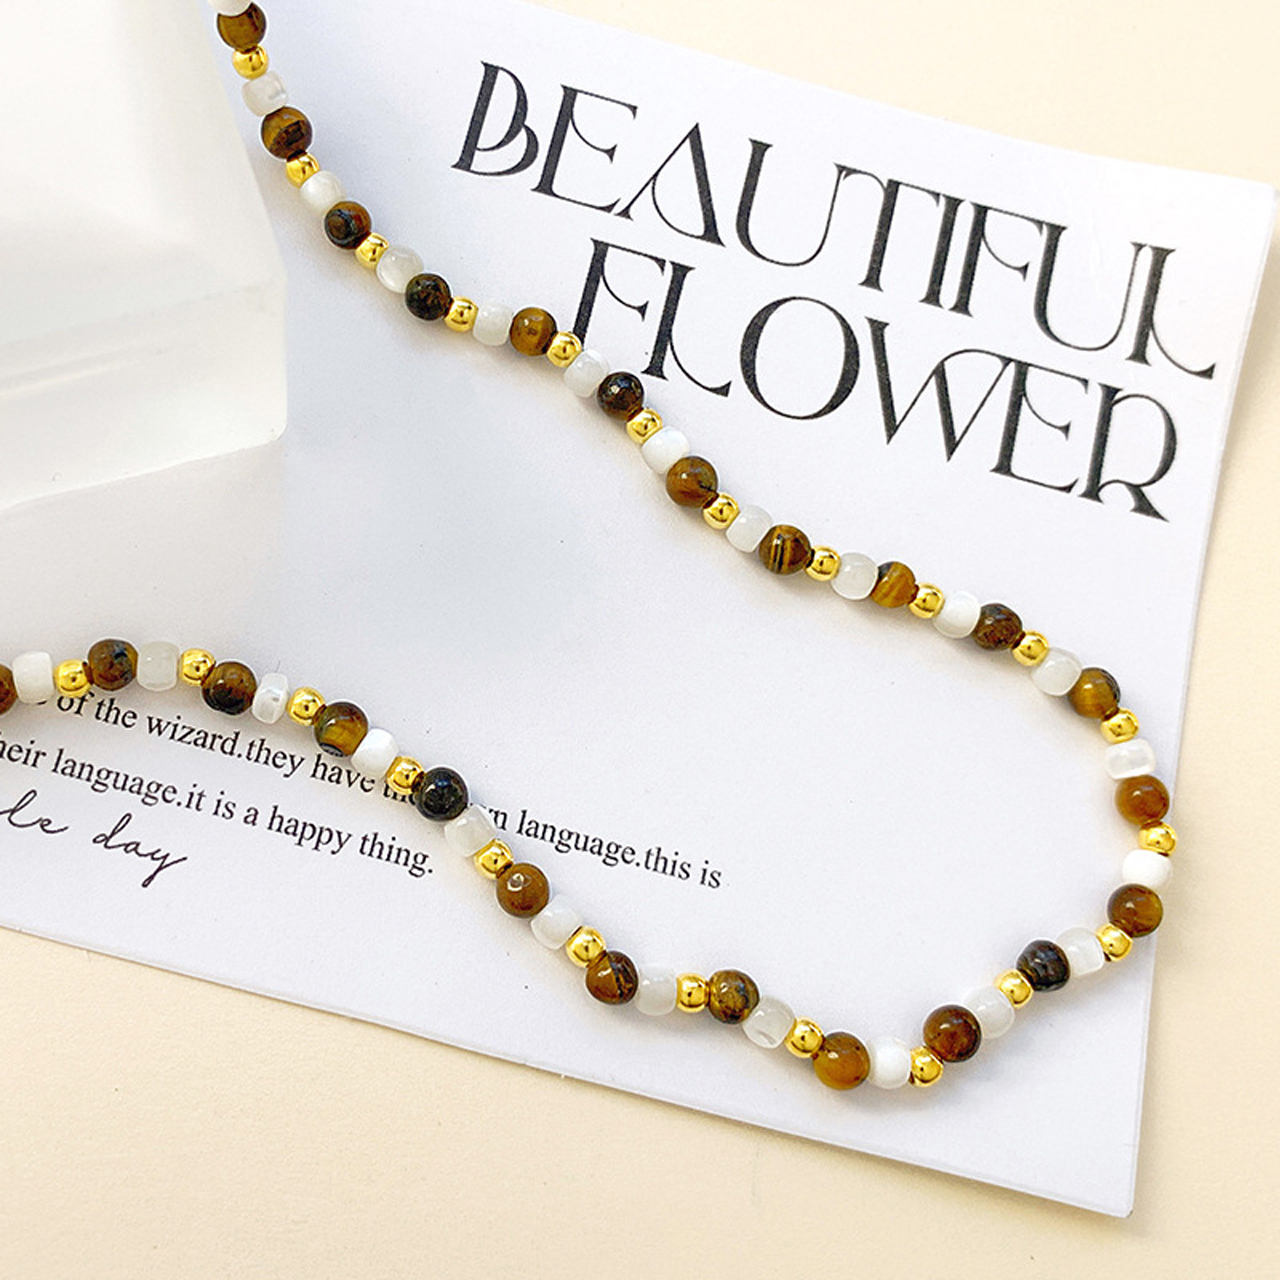 Tiger's Eye Beaded Chain Necklace